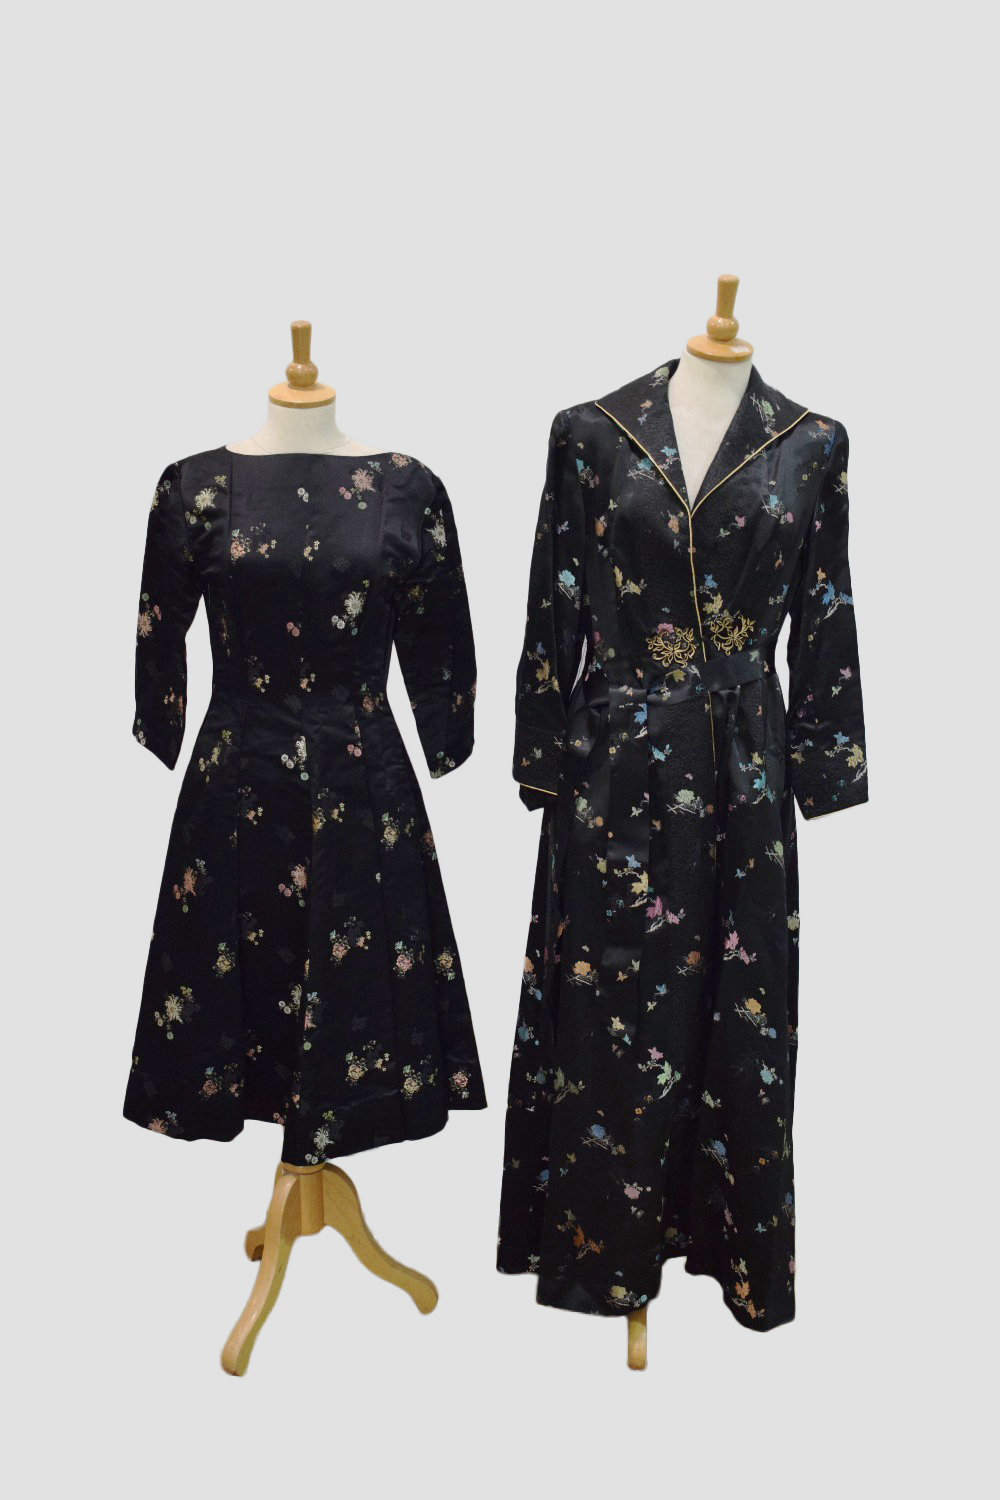 Chinese brocaded black satin evening coat and dress, mid-20th century, made for the Western